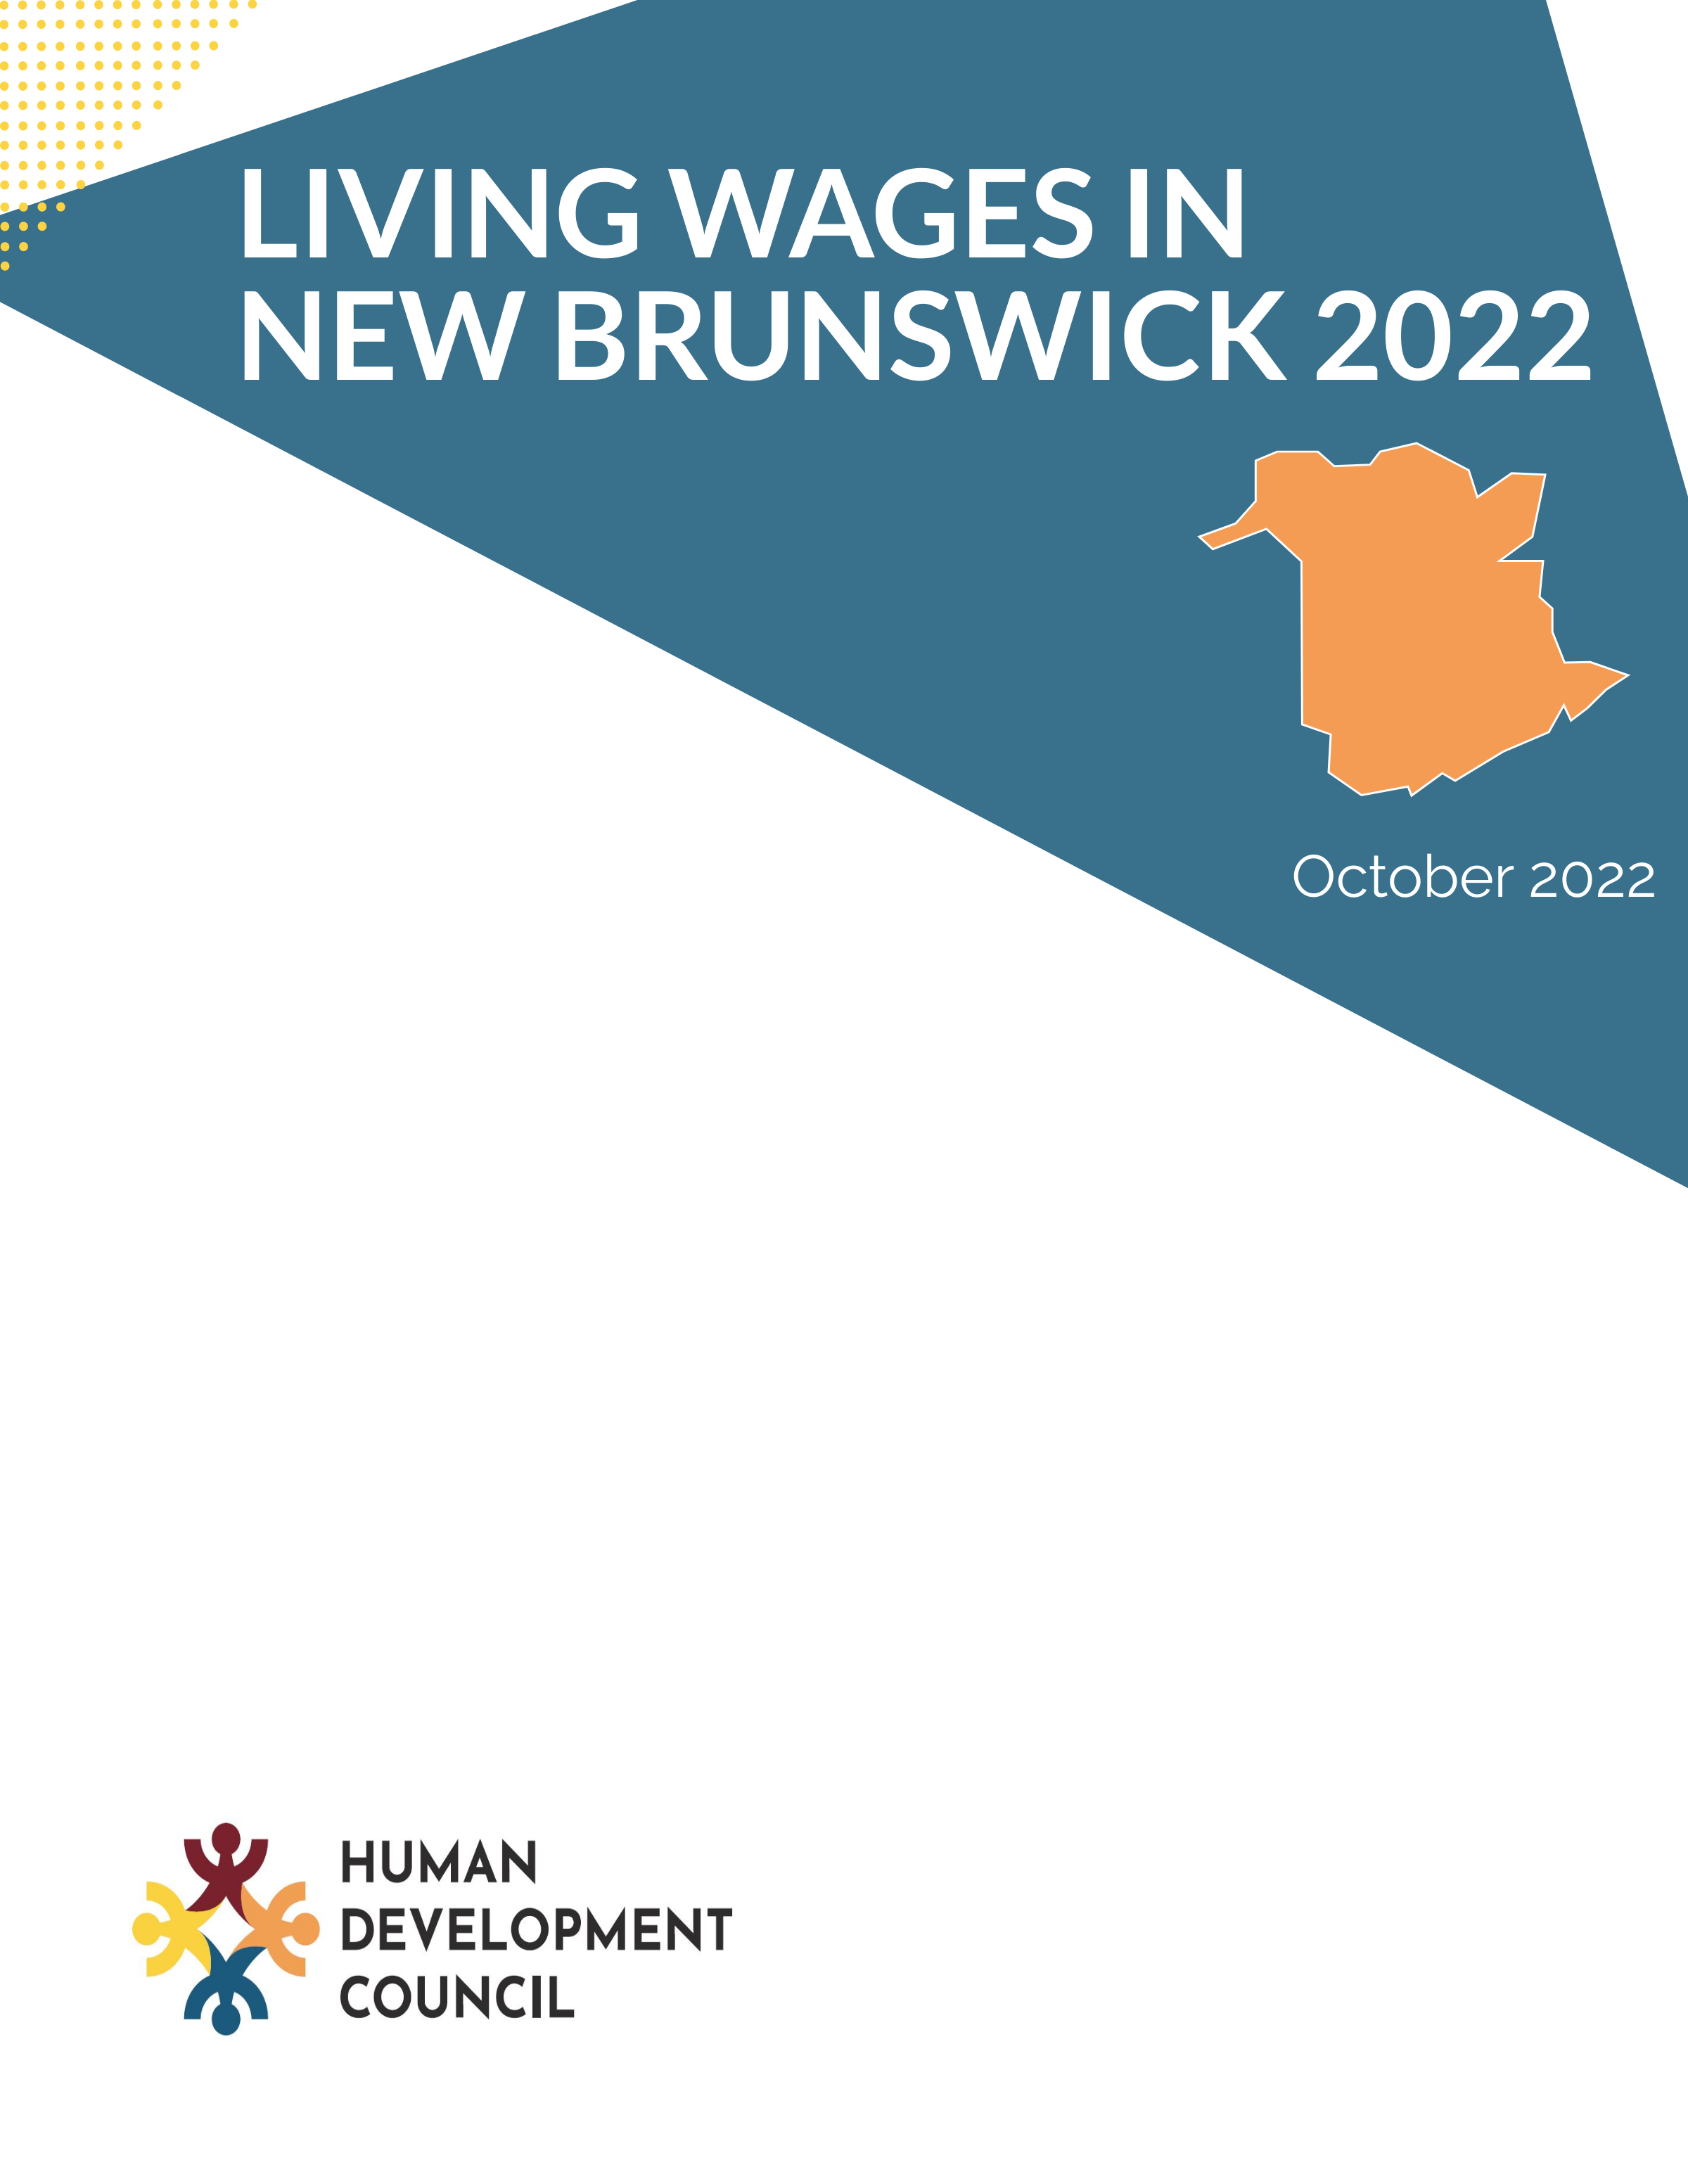 Living Wages in New Brunswick 2022